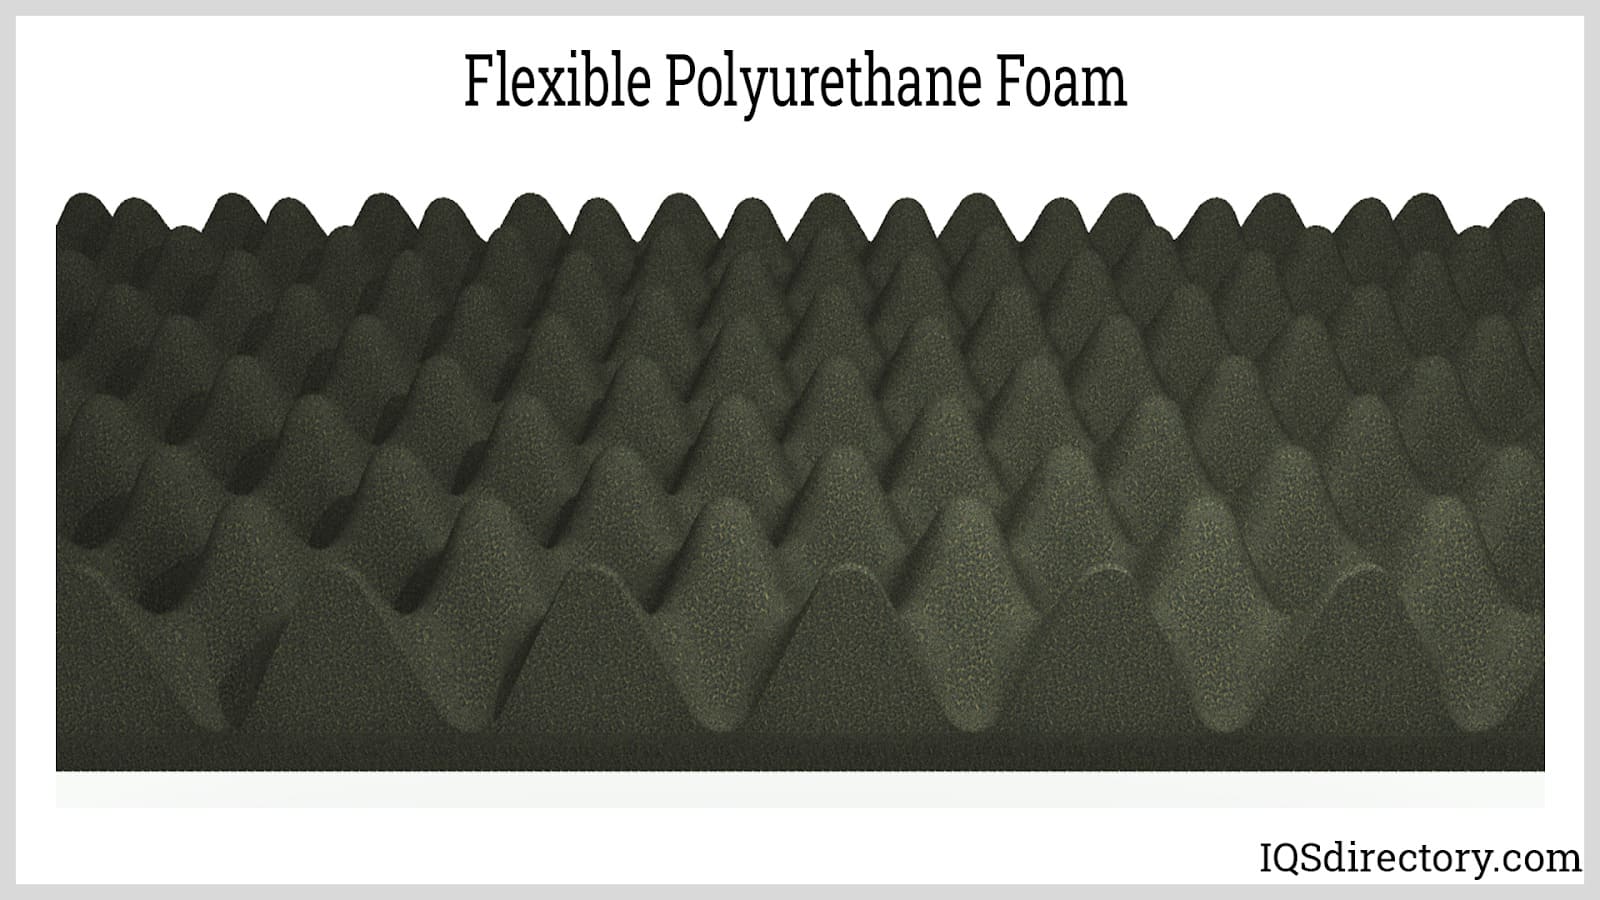 Polyurethane Foam: What Is It? How Is It Made? Applications